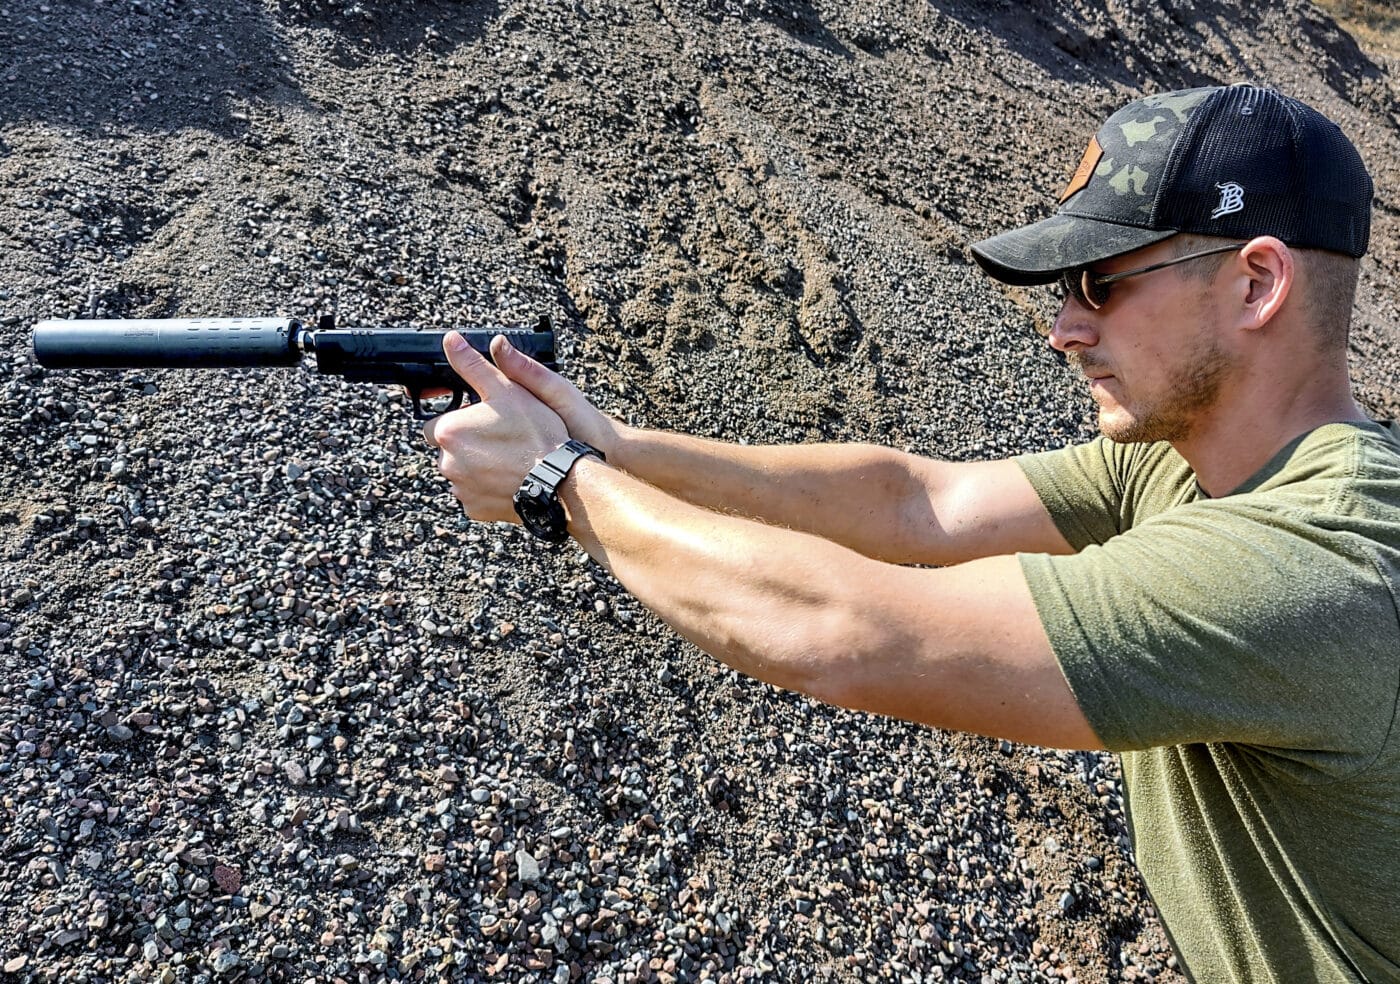 Man shooting an XD-M pistol with a SilencerCo suppressor